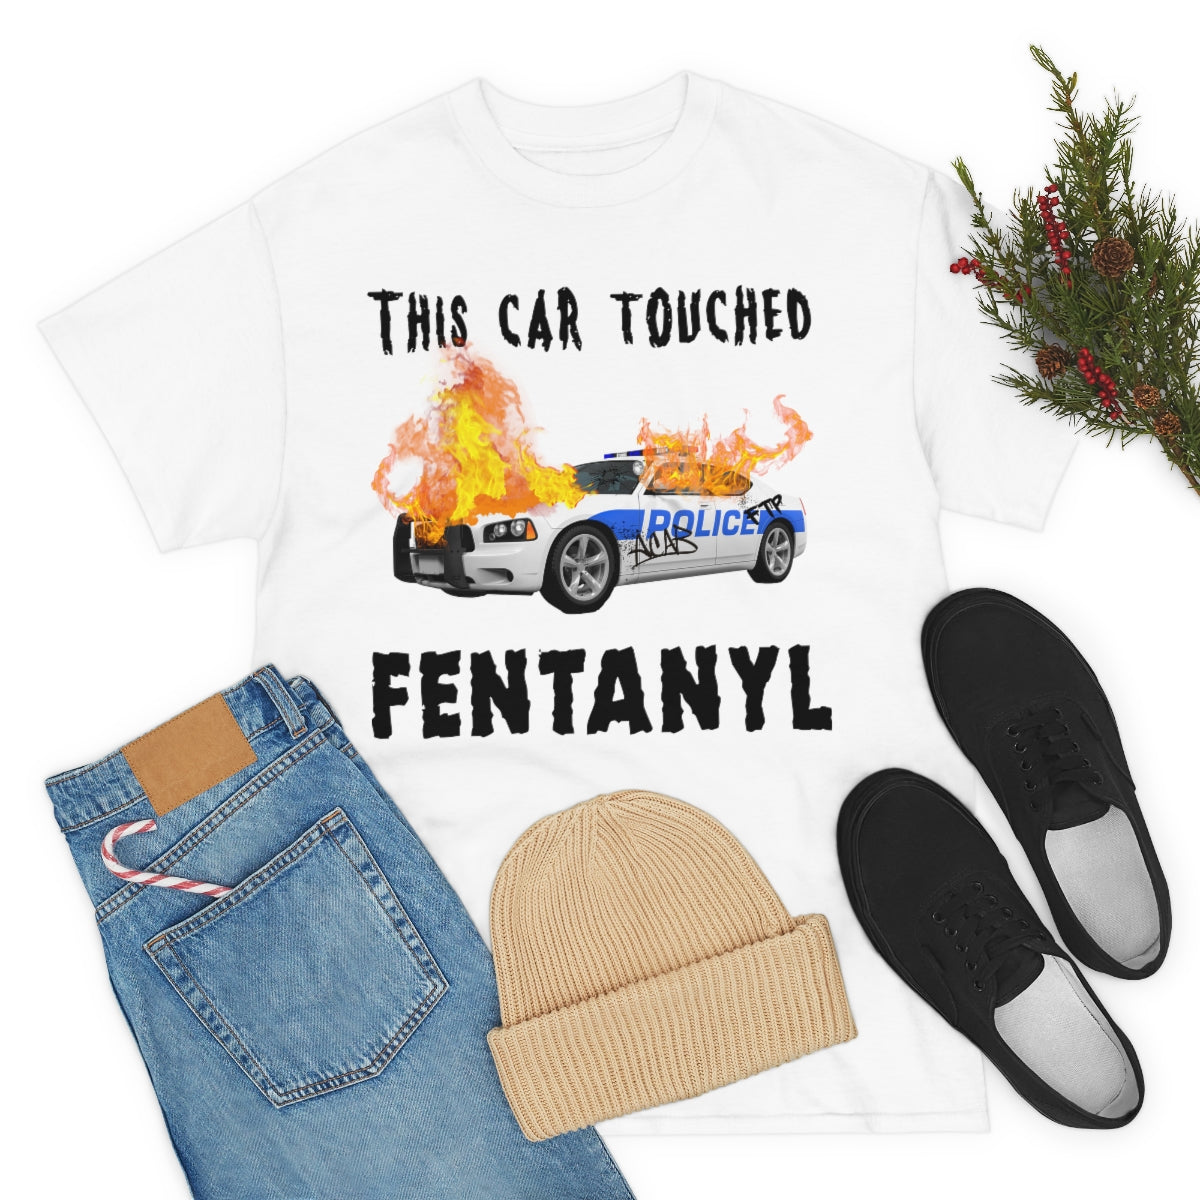 This Car Touched Fentanyl.